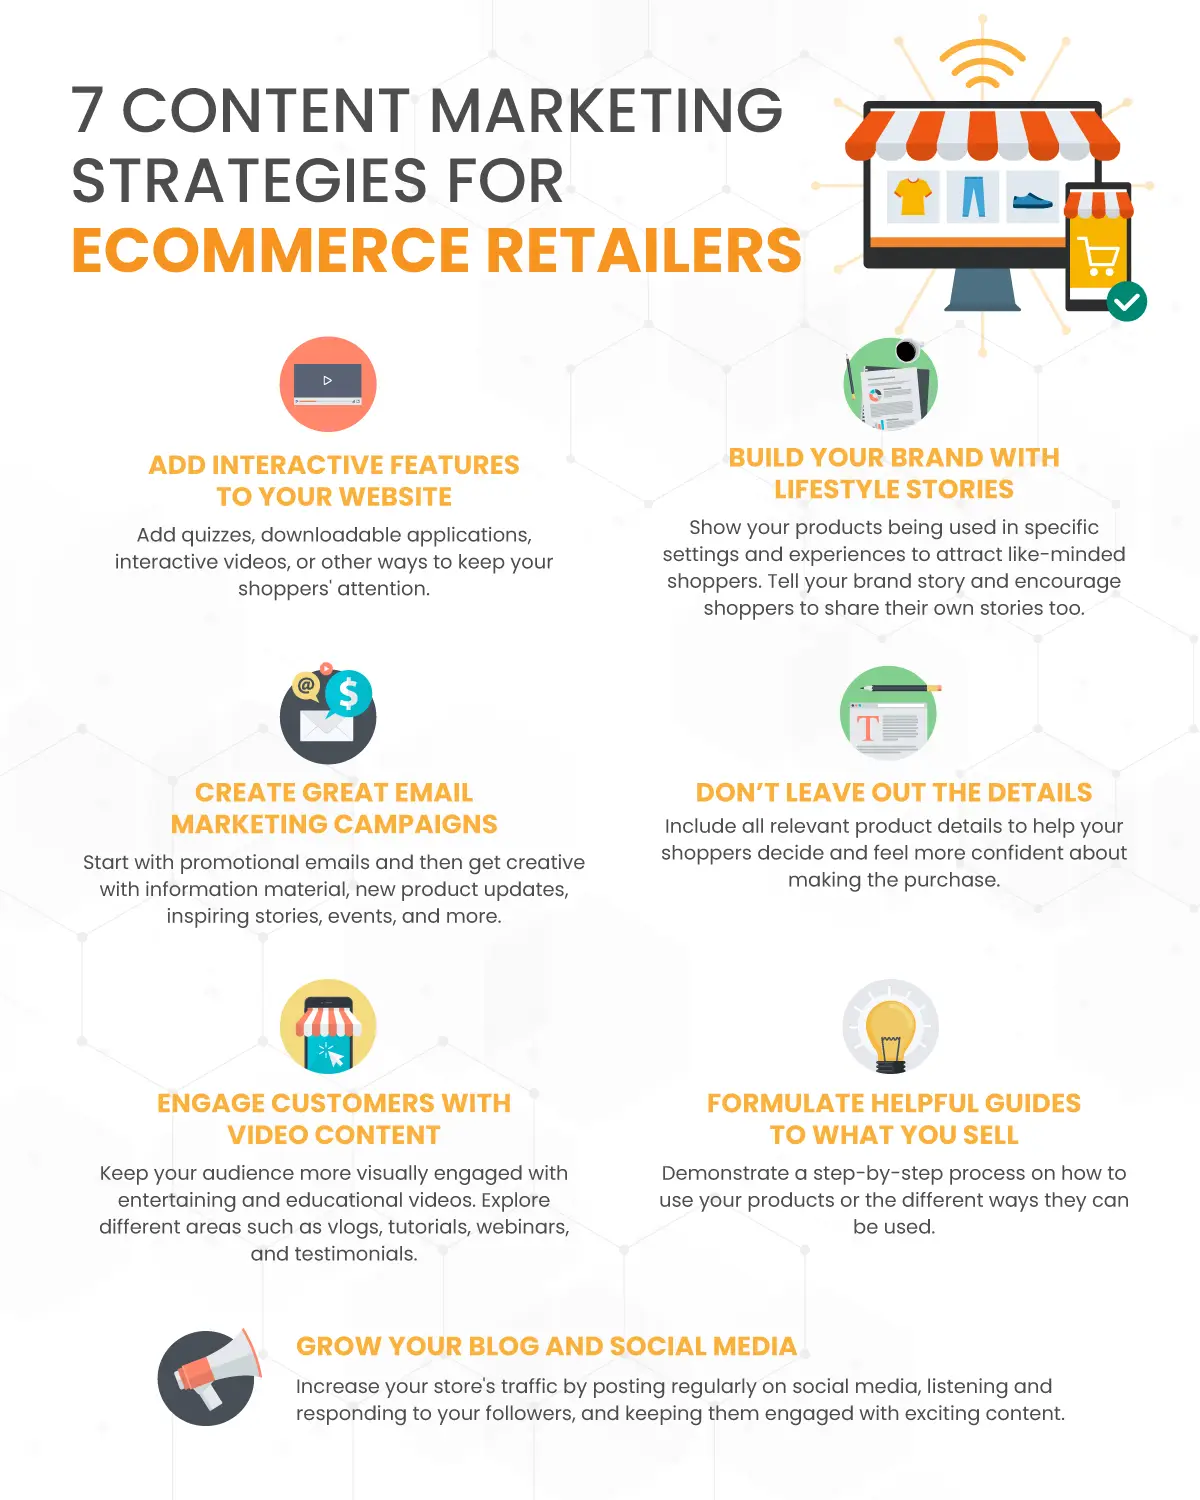 an infographic showing '7 content marketing strategies for eCommerce retailers'